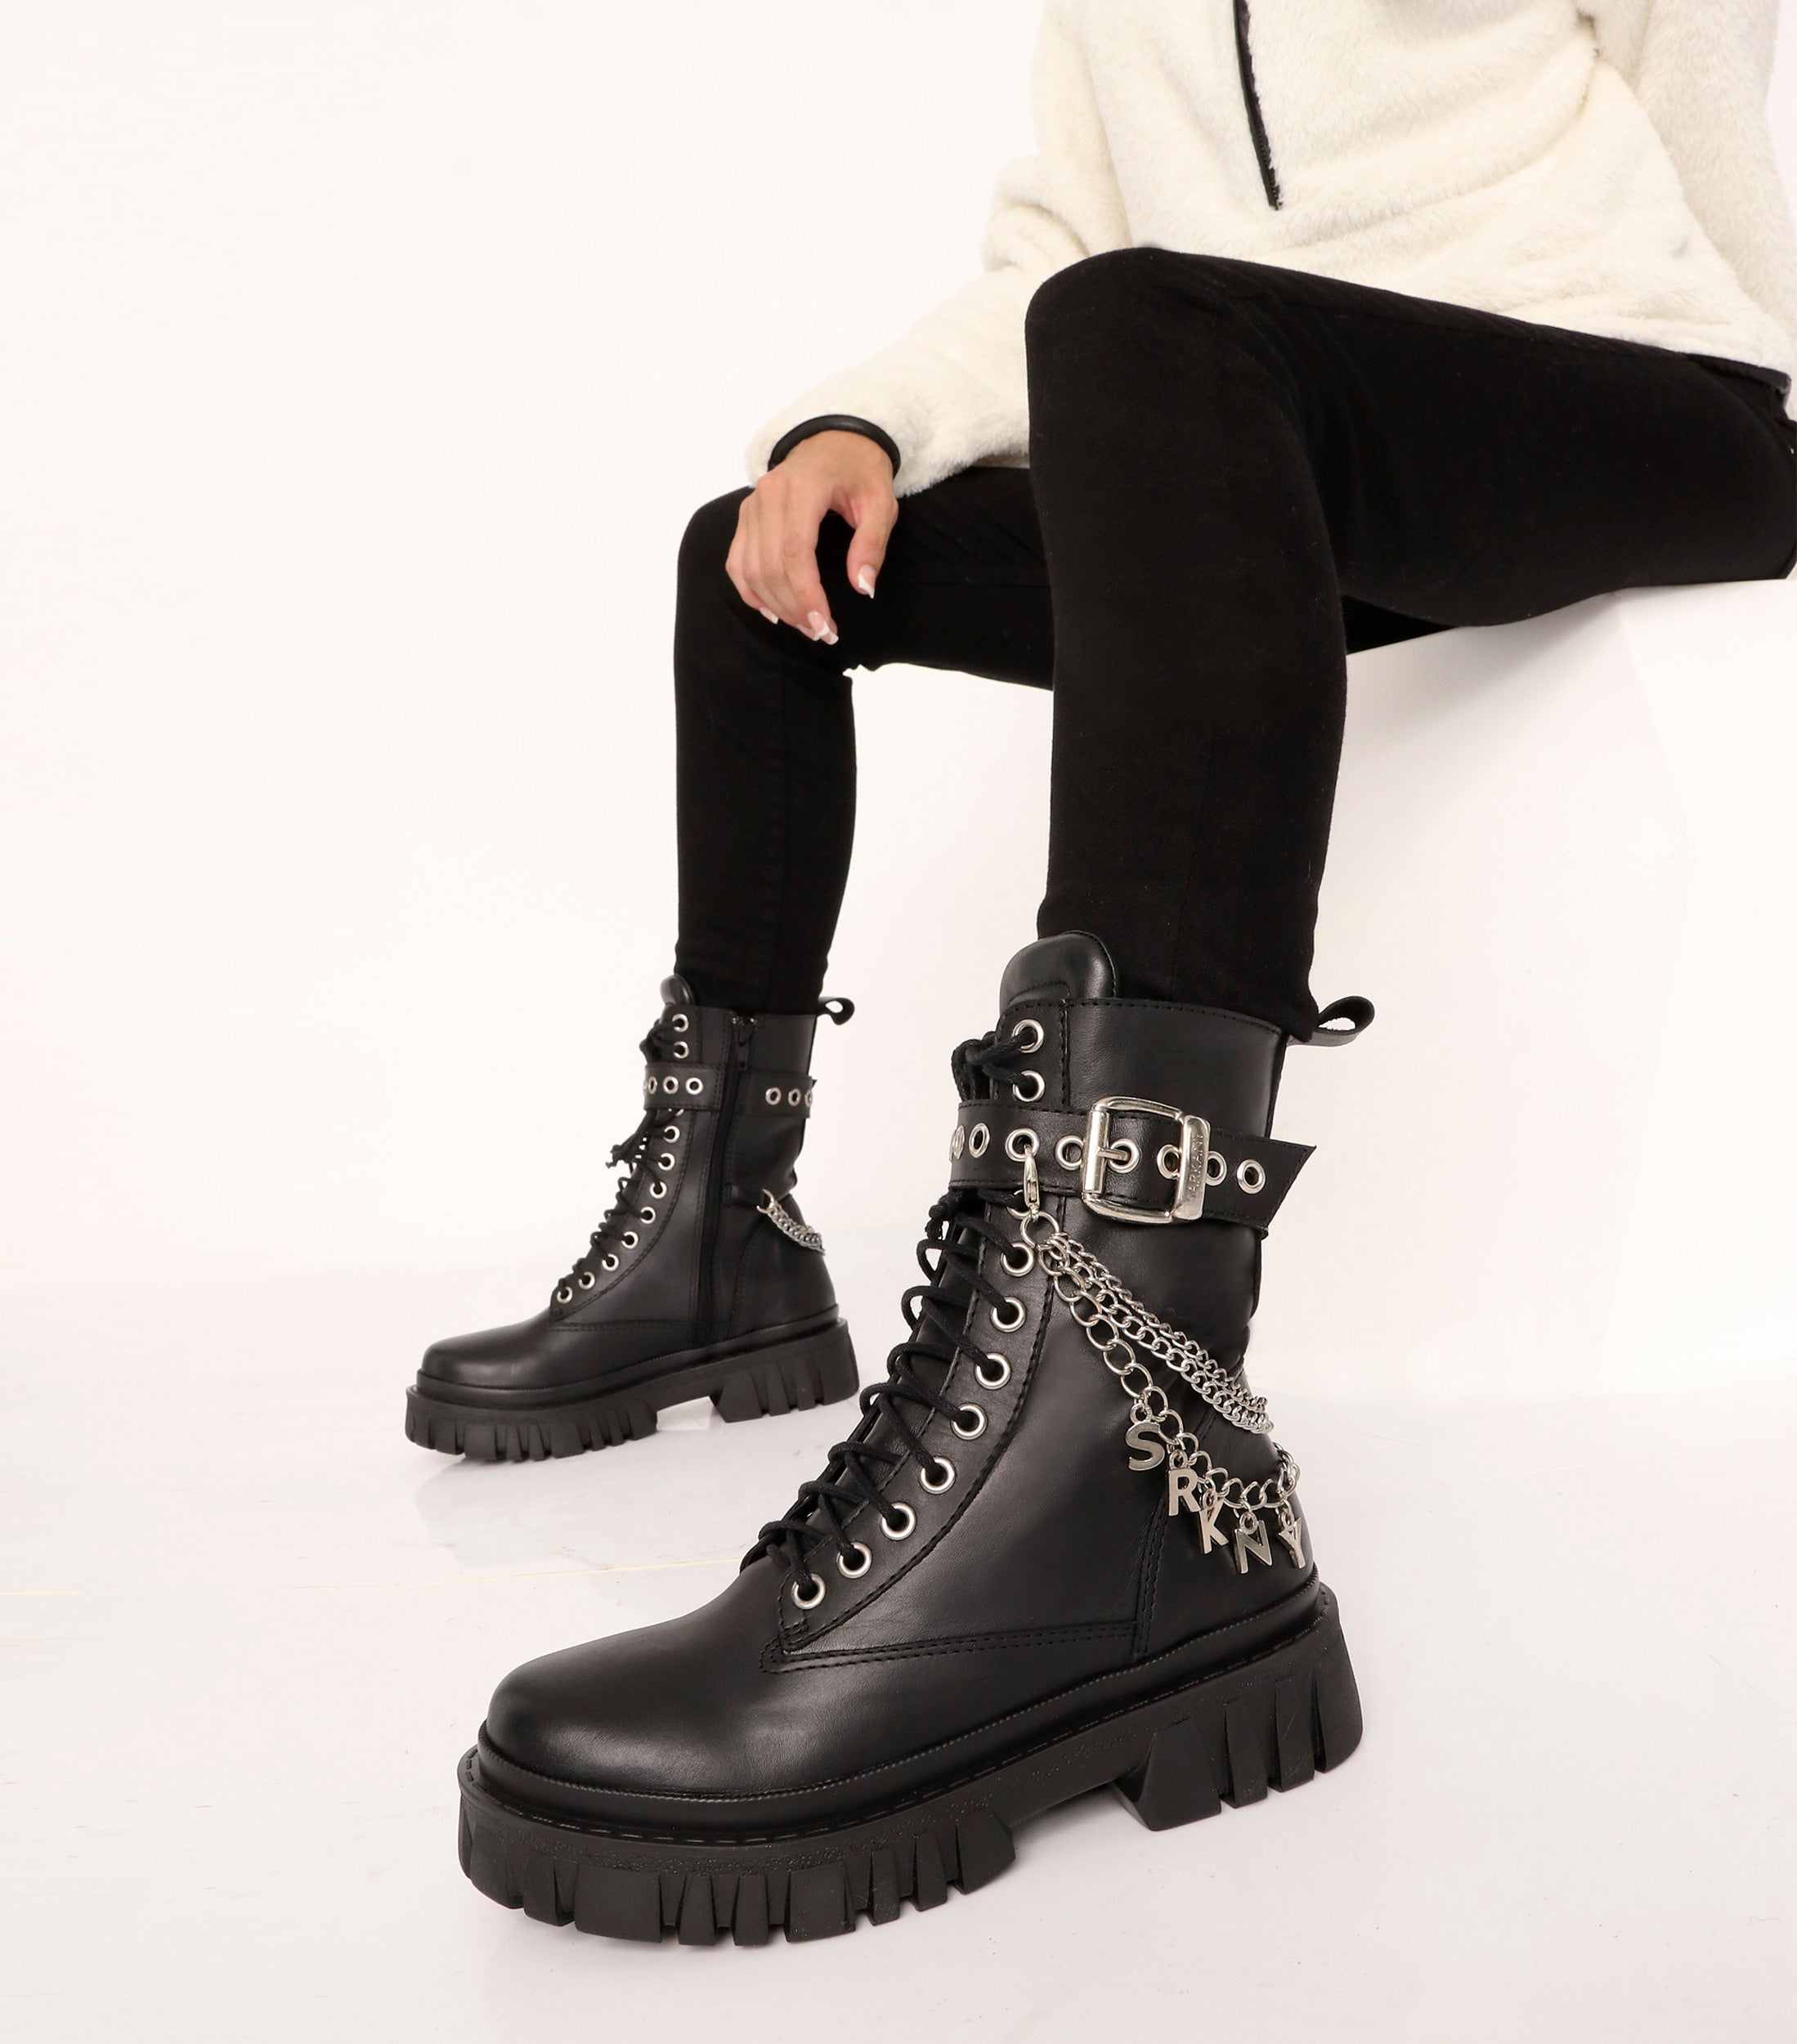 PALY BLACK COMBAT BOOTS